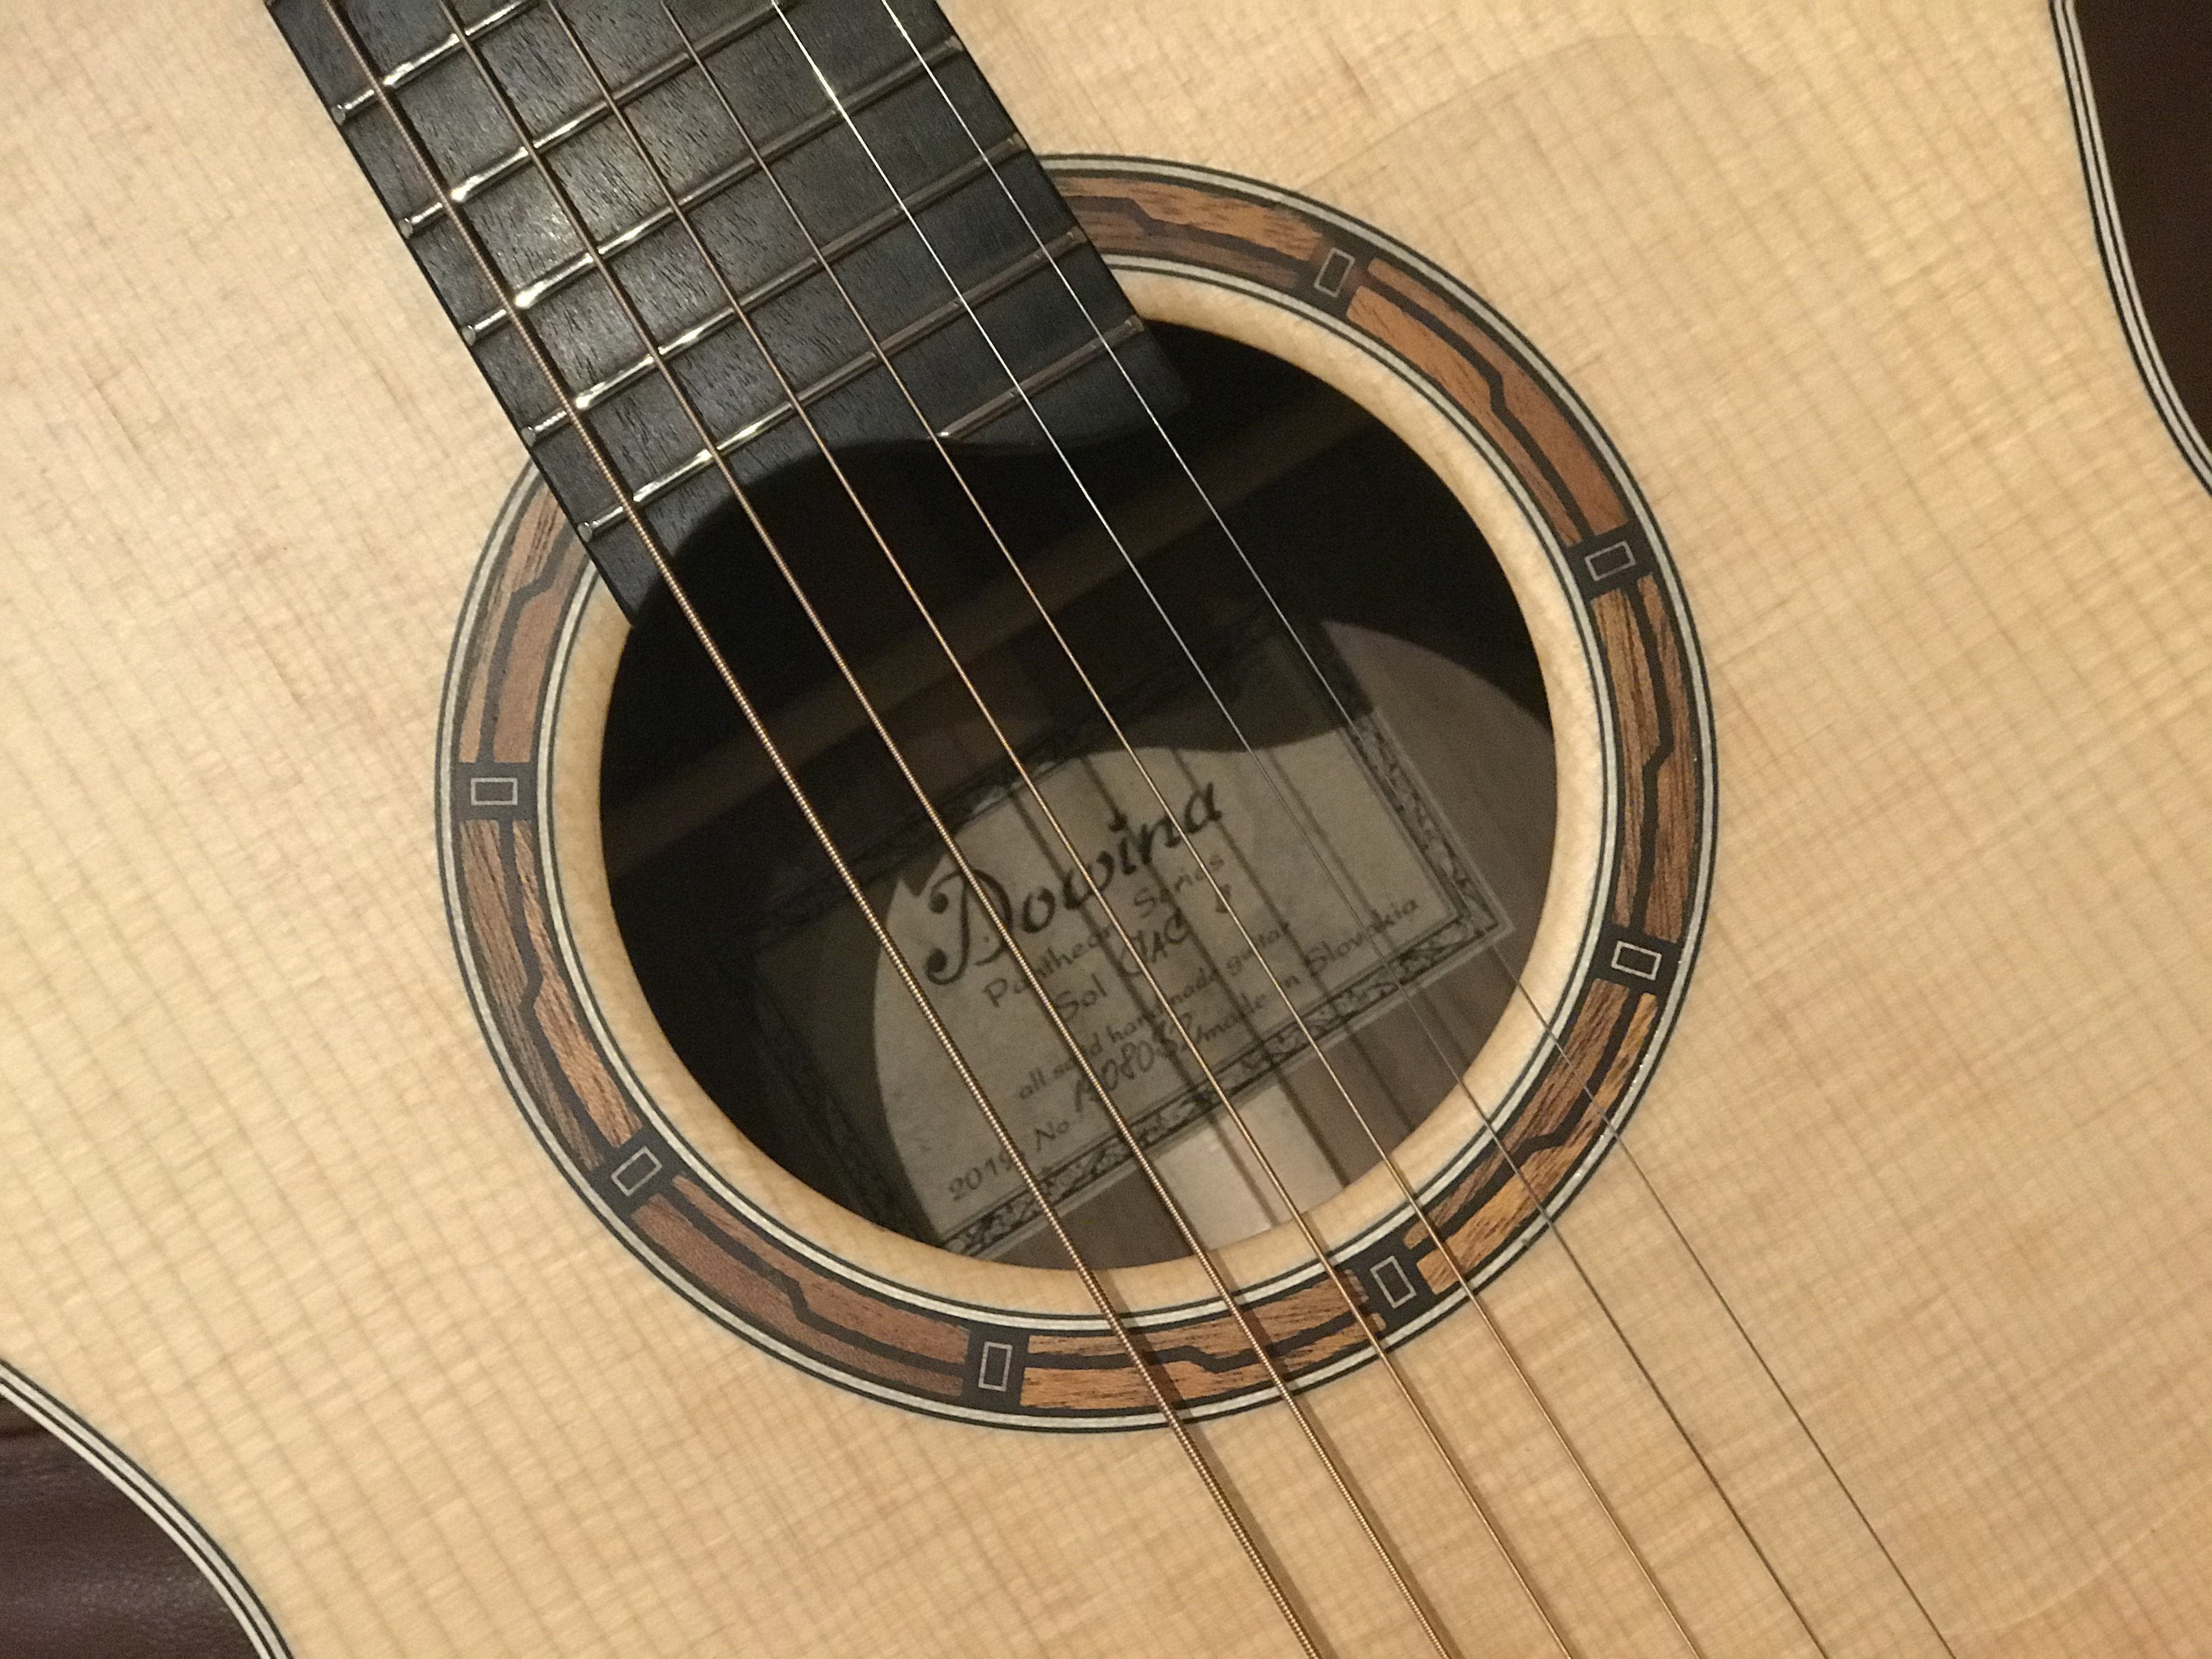 Dowina Walnut GAC Swiss Moon Spruce, Acoustic Guitar for sale at Richards Guitars.